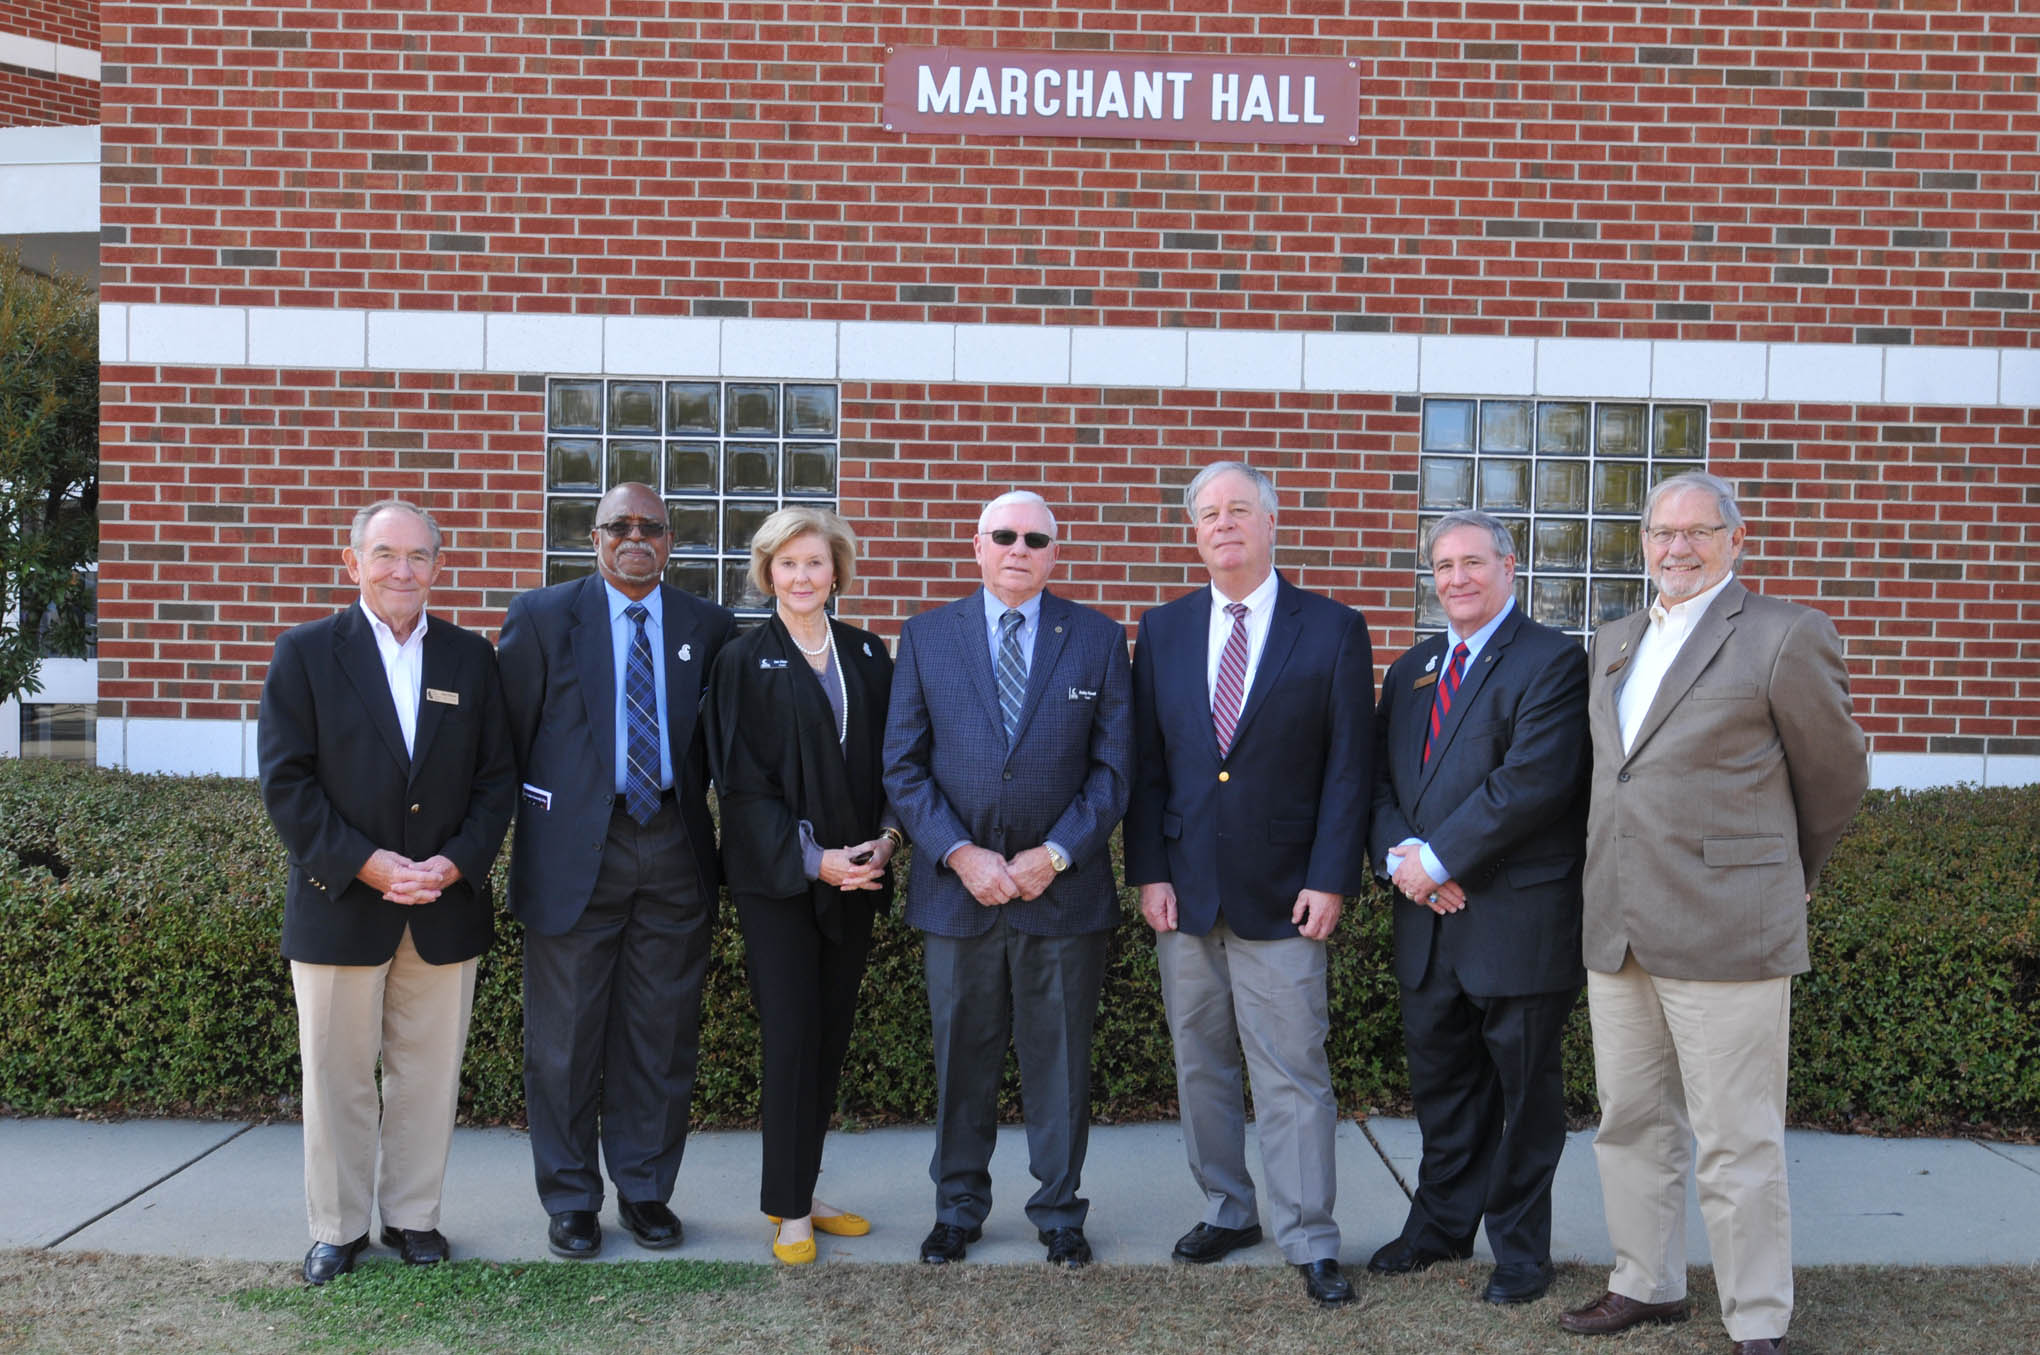 Click to enlarge,  Dr. T. Eston "Bud" Marchant (third from right) is pictured with Central Carolina Community College Trustees (left to right) Douglas "Doug" H. Wilkinson Jr., James French, Jan Hayes, L.W. "Bobby" Powell, Julian Philpott, and Bill Tatum, in front of Marchant Hall on the CCCC Lee Main Campus in Sanford, N.C. 